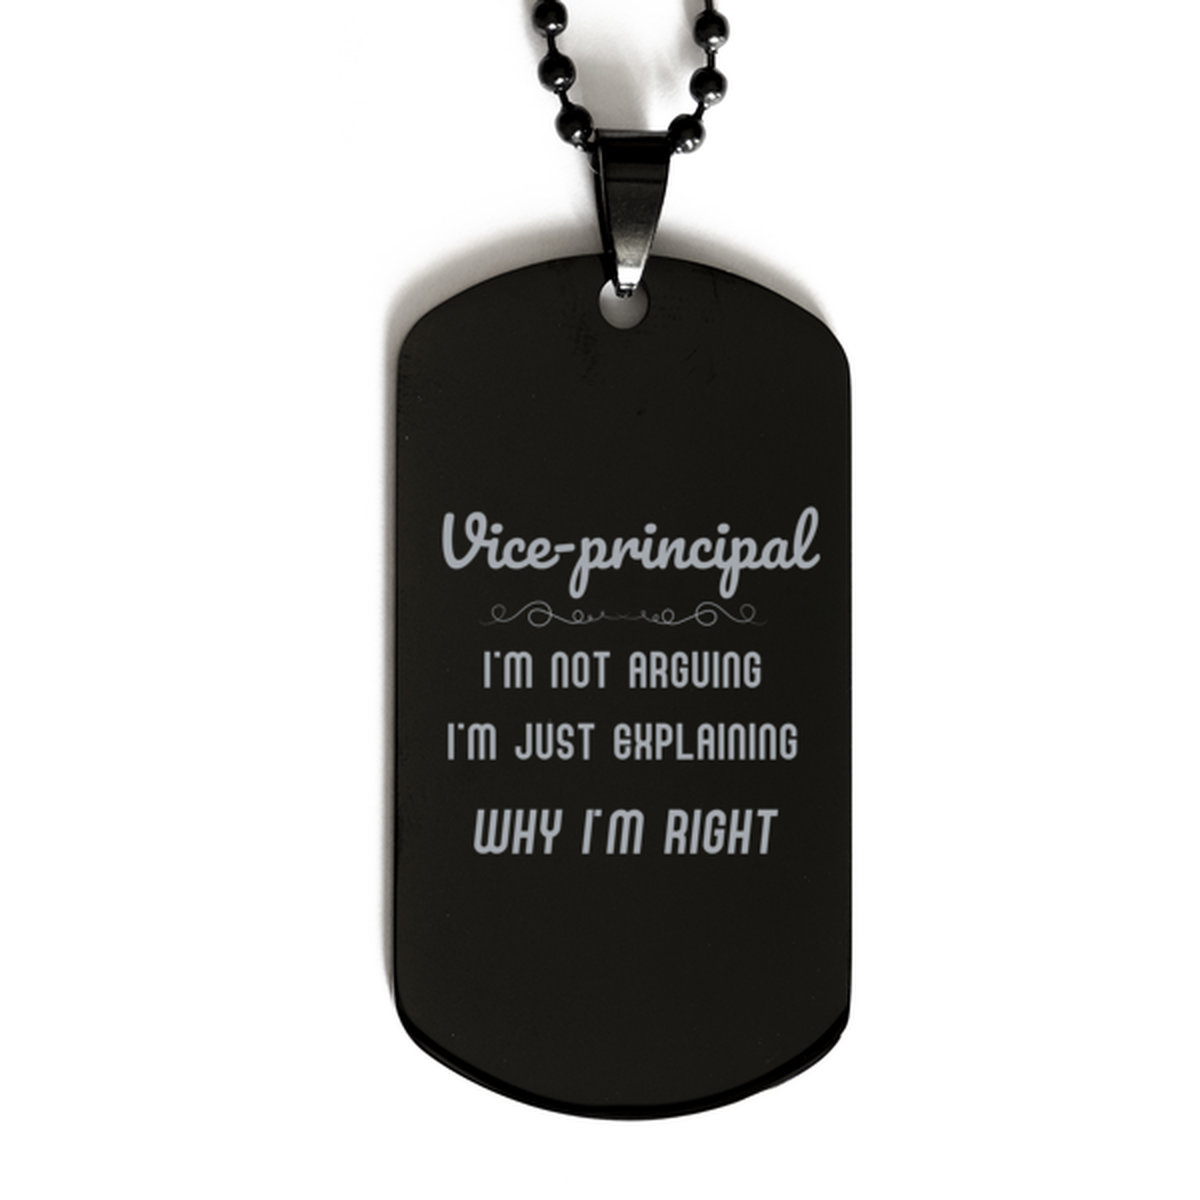 Vice-principal I'm not Arguing. I'm Just Explaining Why I'm RIGHT Black Dog Tag, Funny Saying Quote Vice-principal Gifts For Vice-principal Graduation Birthday Christmas Gifts for Men Women Coworker